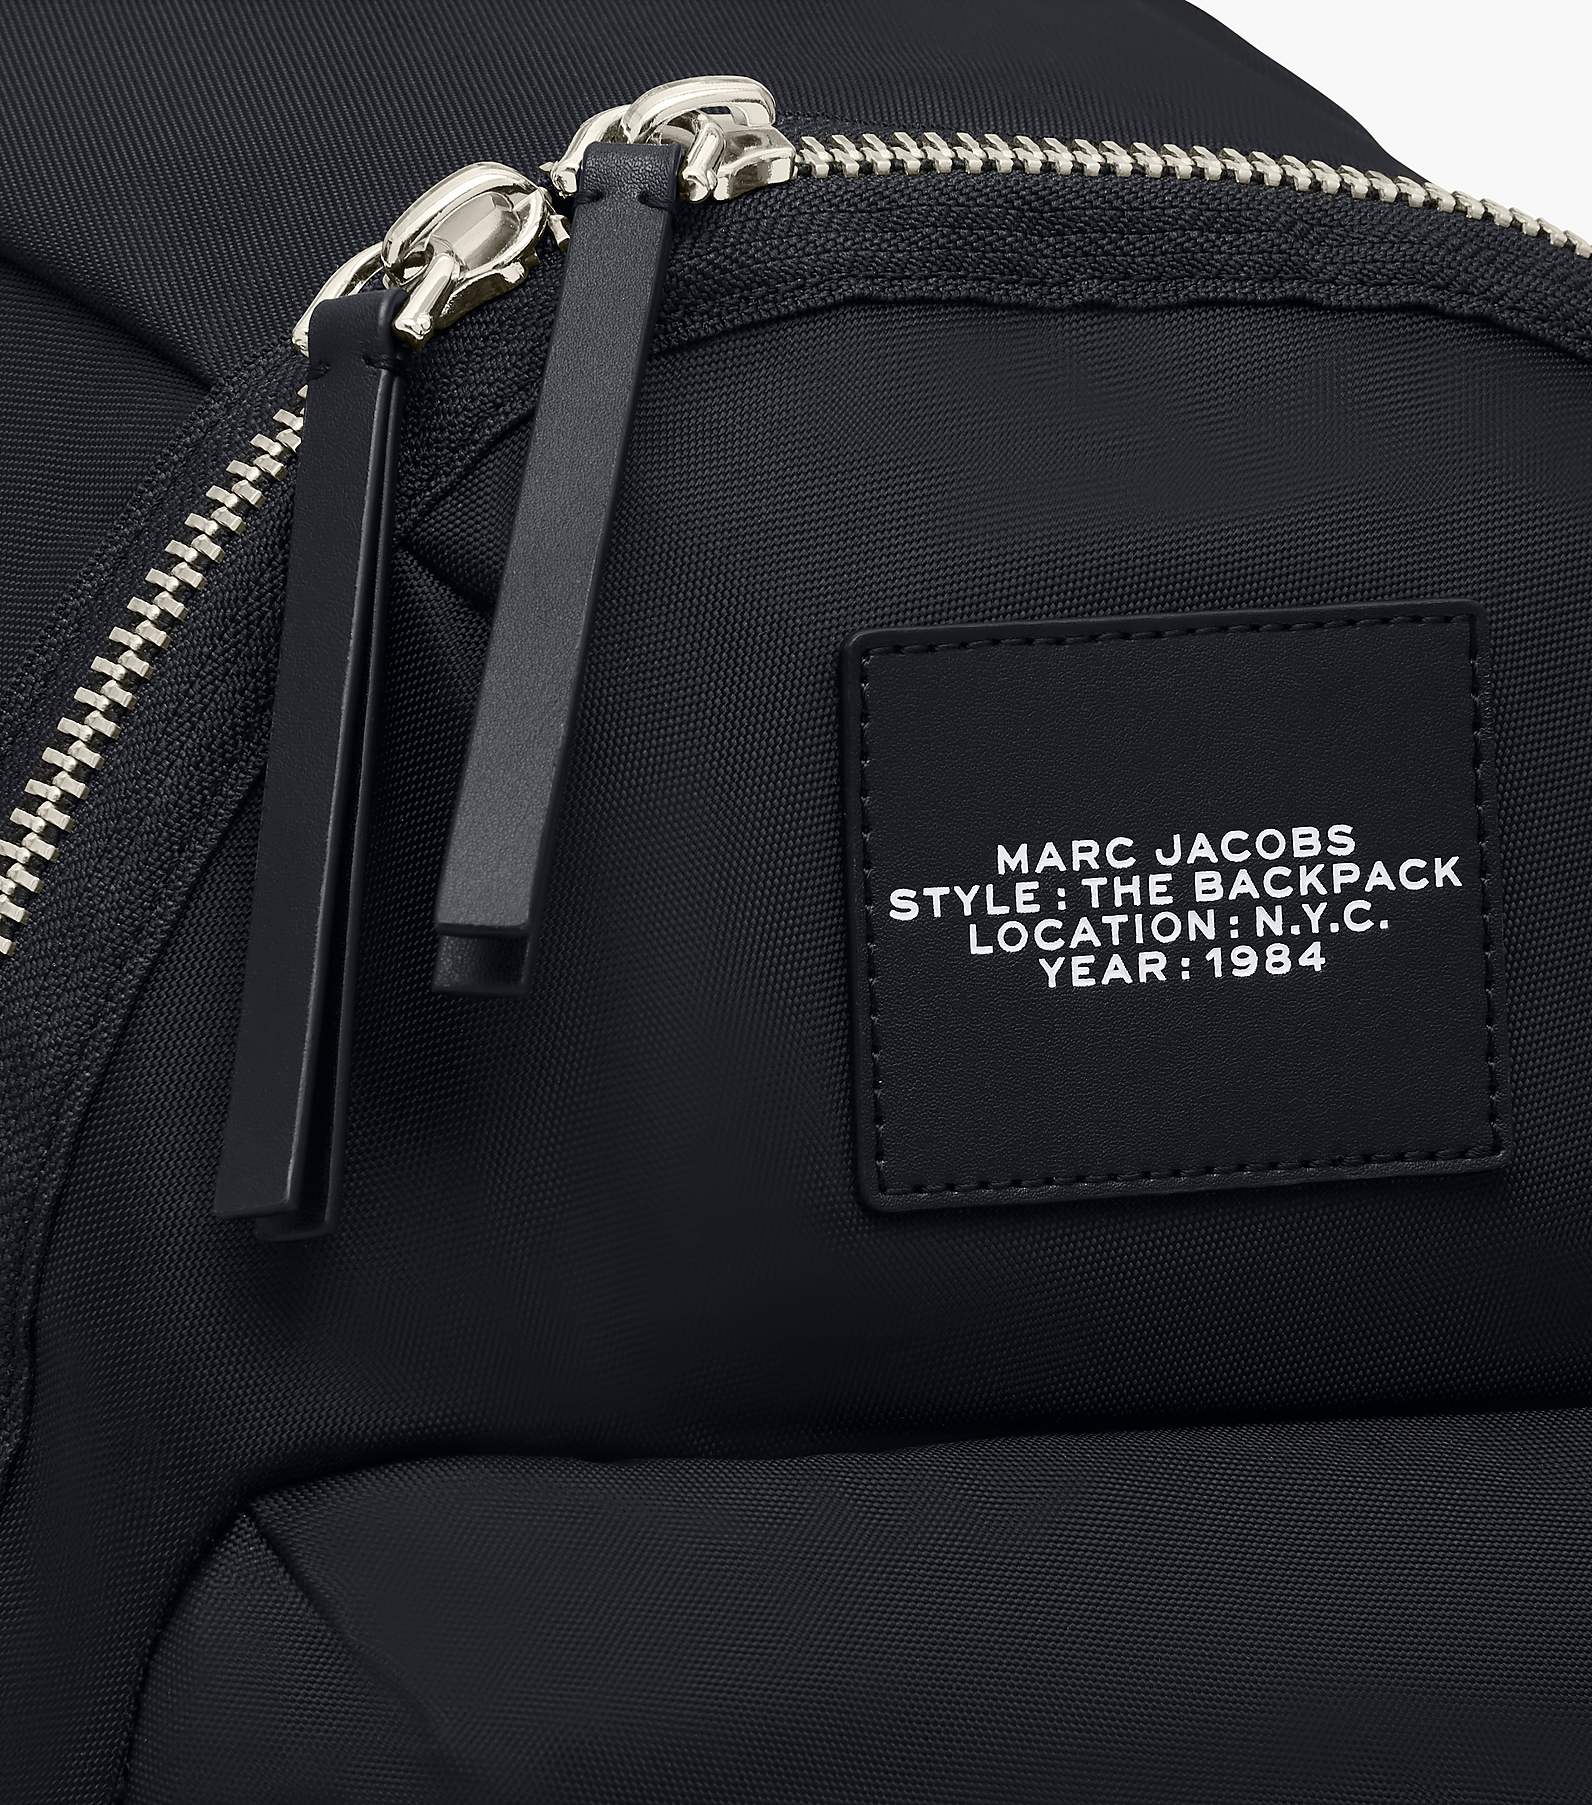 MARC JACOBS マークジェイコブス リュック バックパック ナイロン